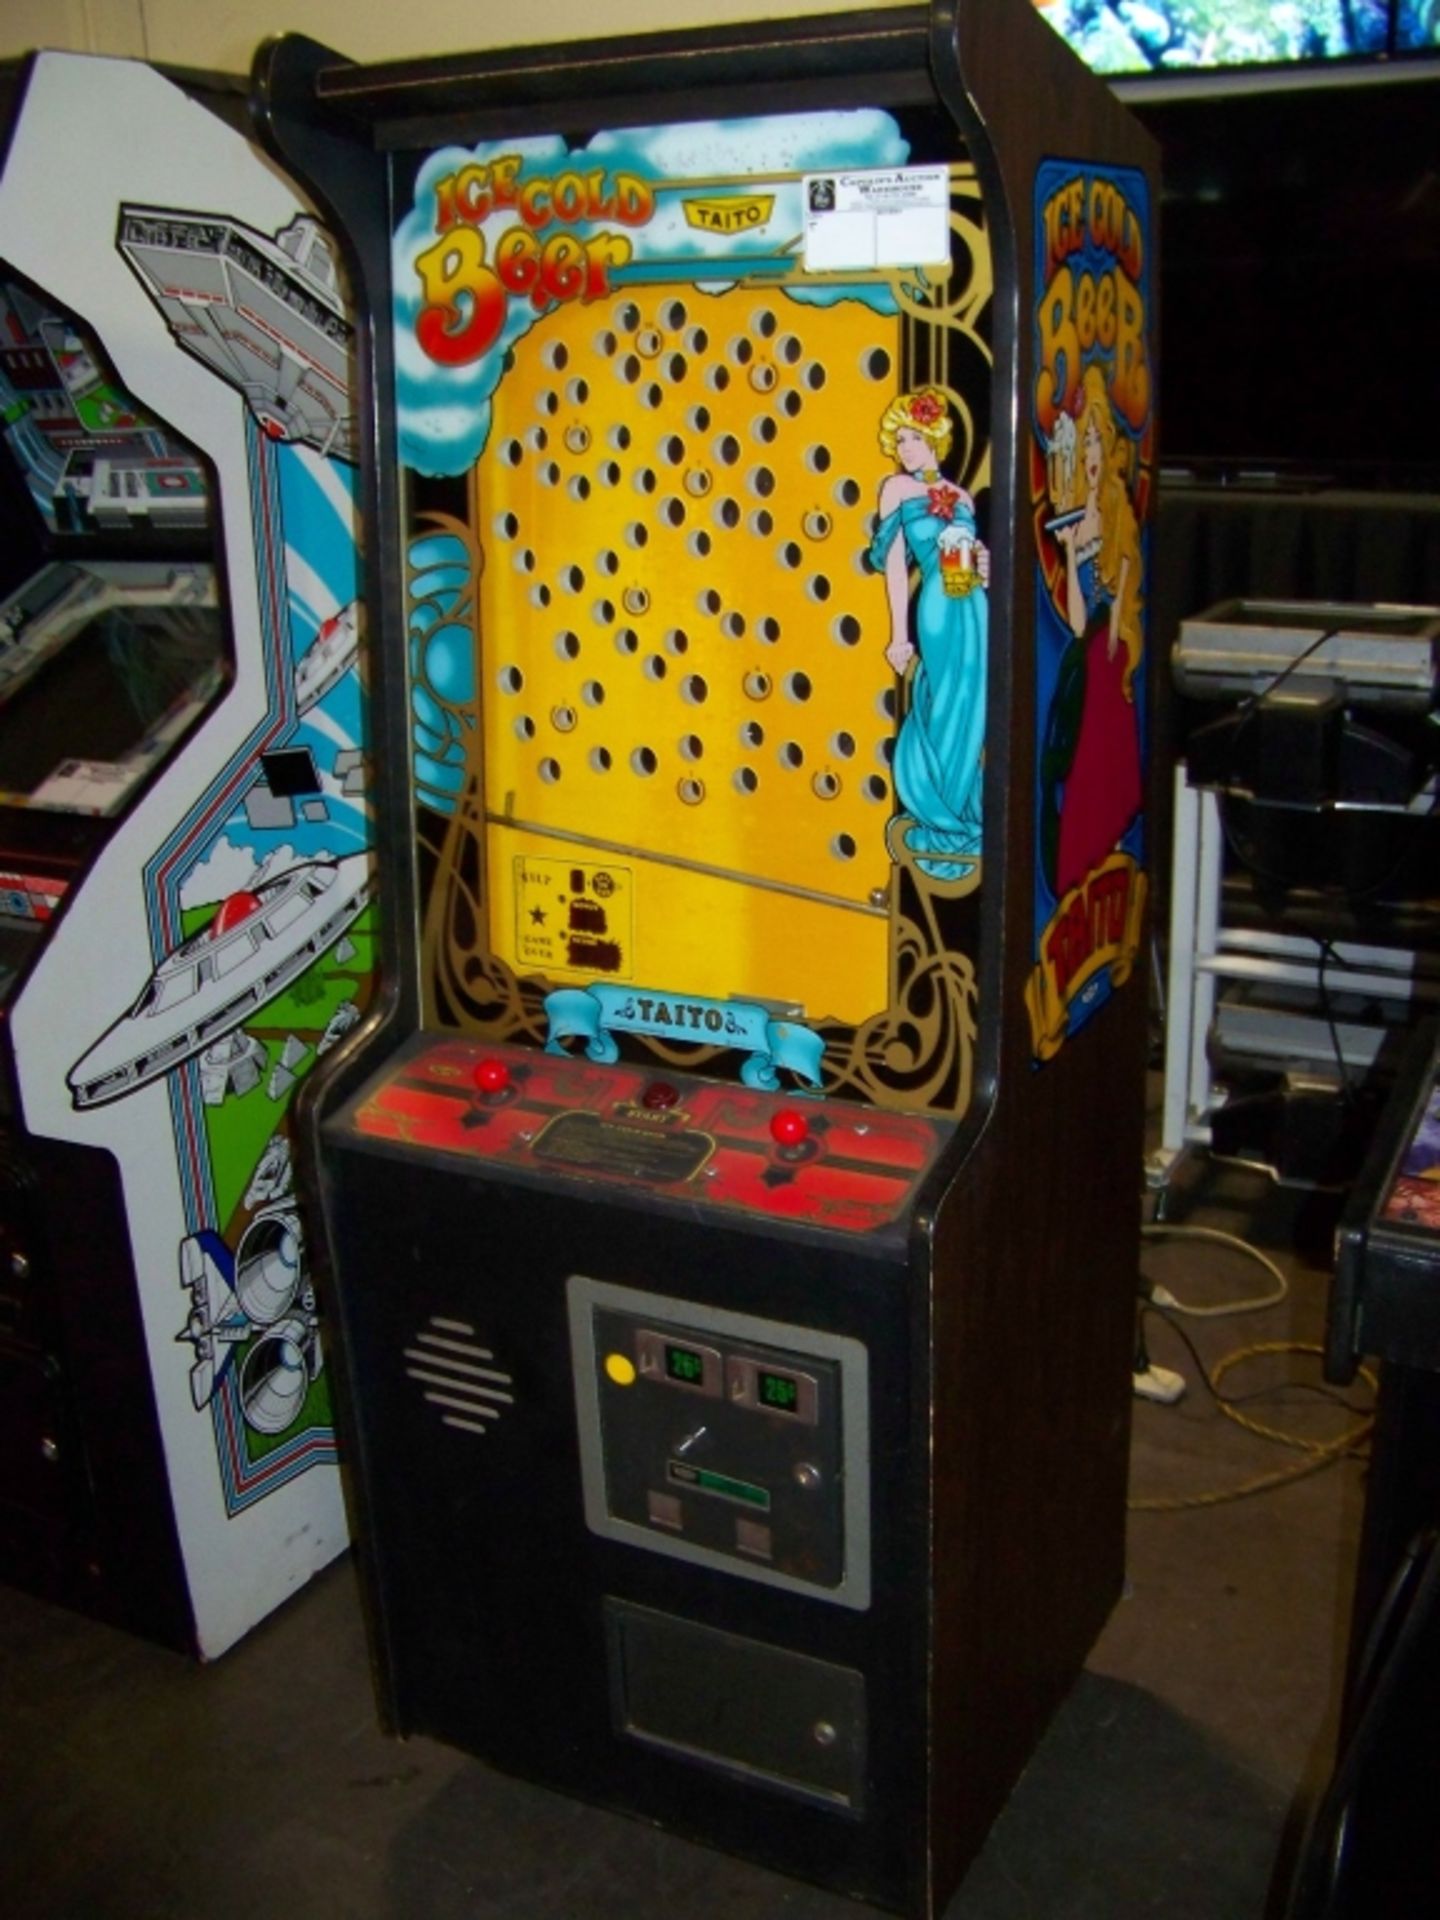 ICE COLD BEER ARCADE GAME TAITO CLASSIC - Image 6 of 7